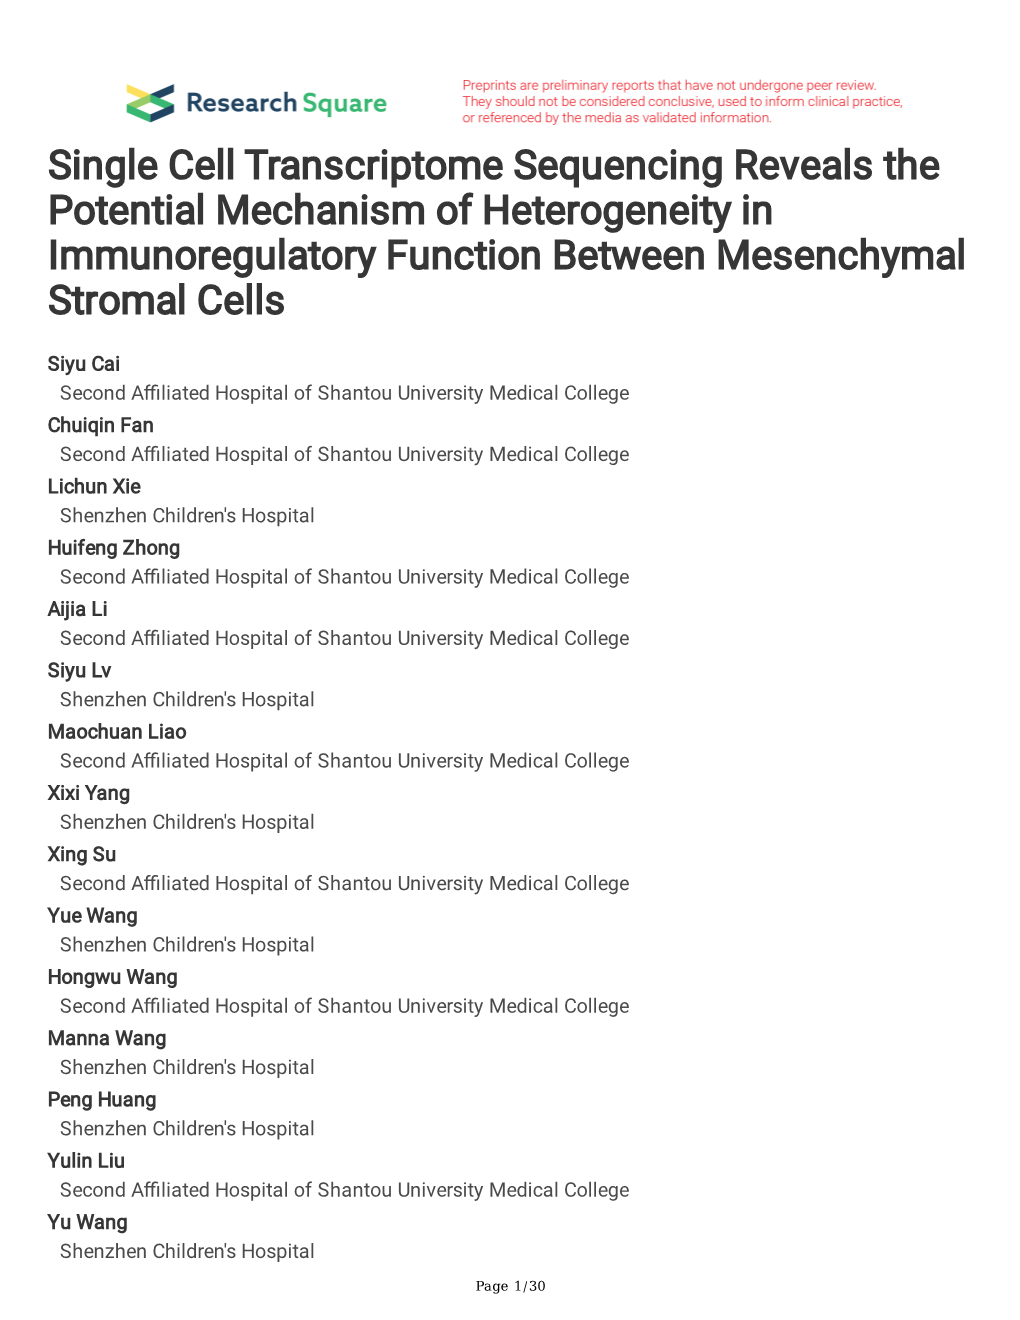 Single Cell Transcriptome Sequencing Reveals the Potential Mechanism of Heterogeneity in Immunoregulatory Function Between Mesenchymal Stromal Cells